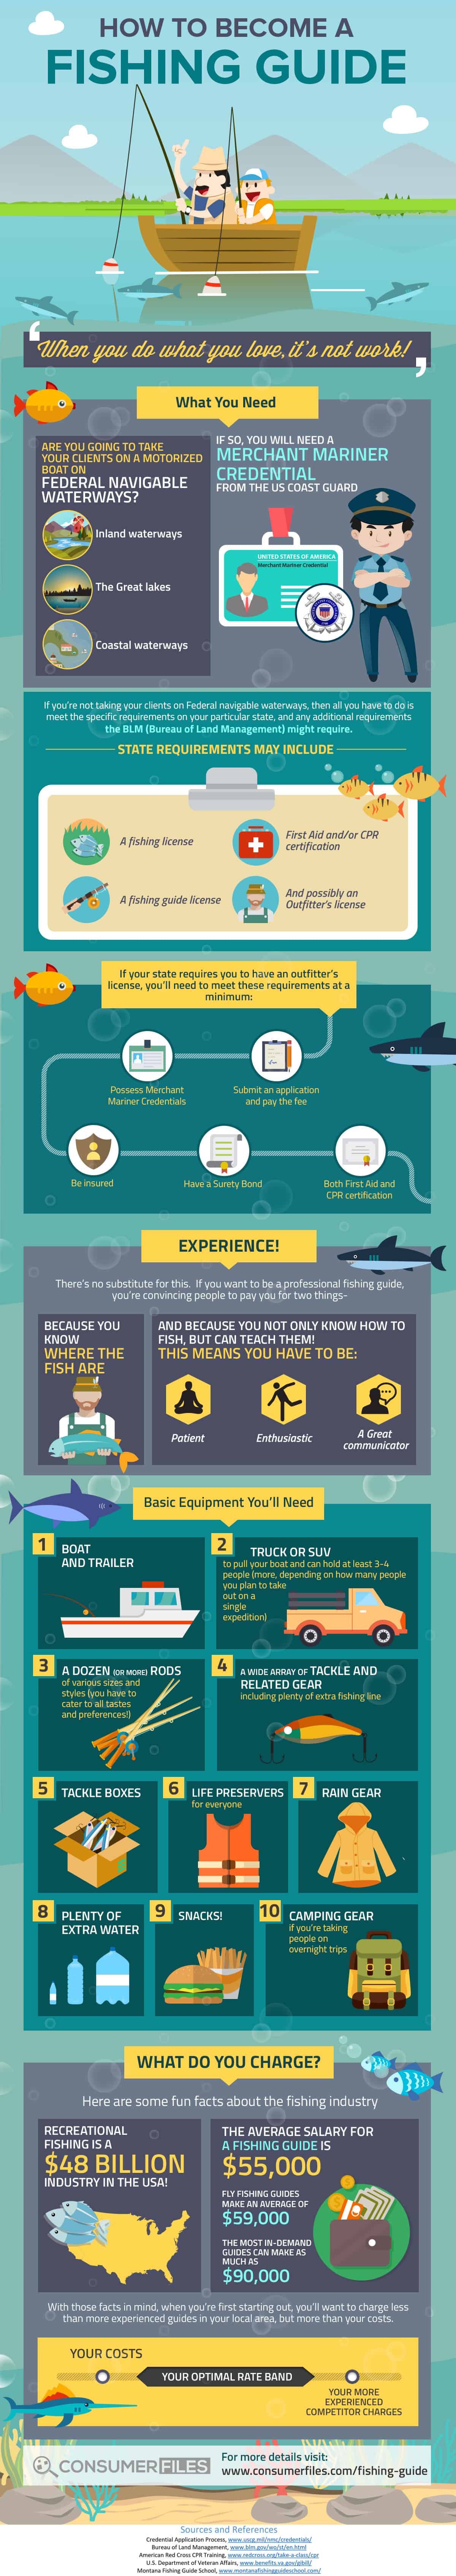 how to become a fishing guide infographic - consumer files